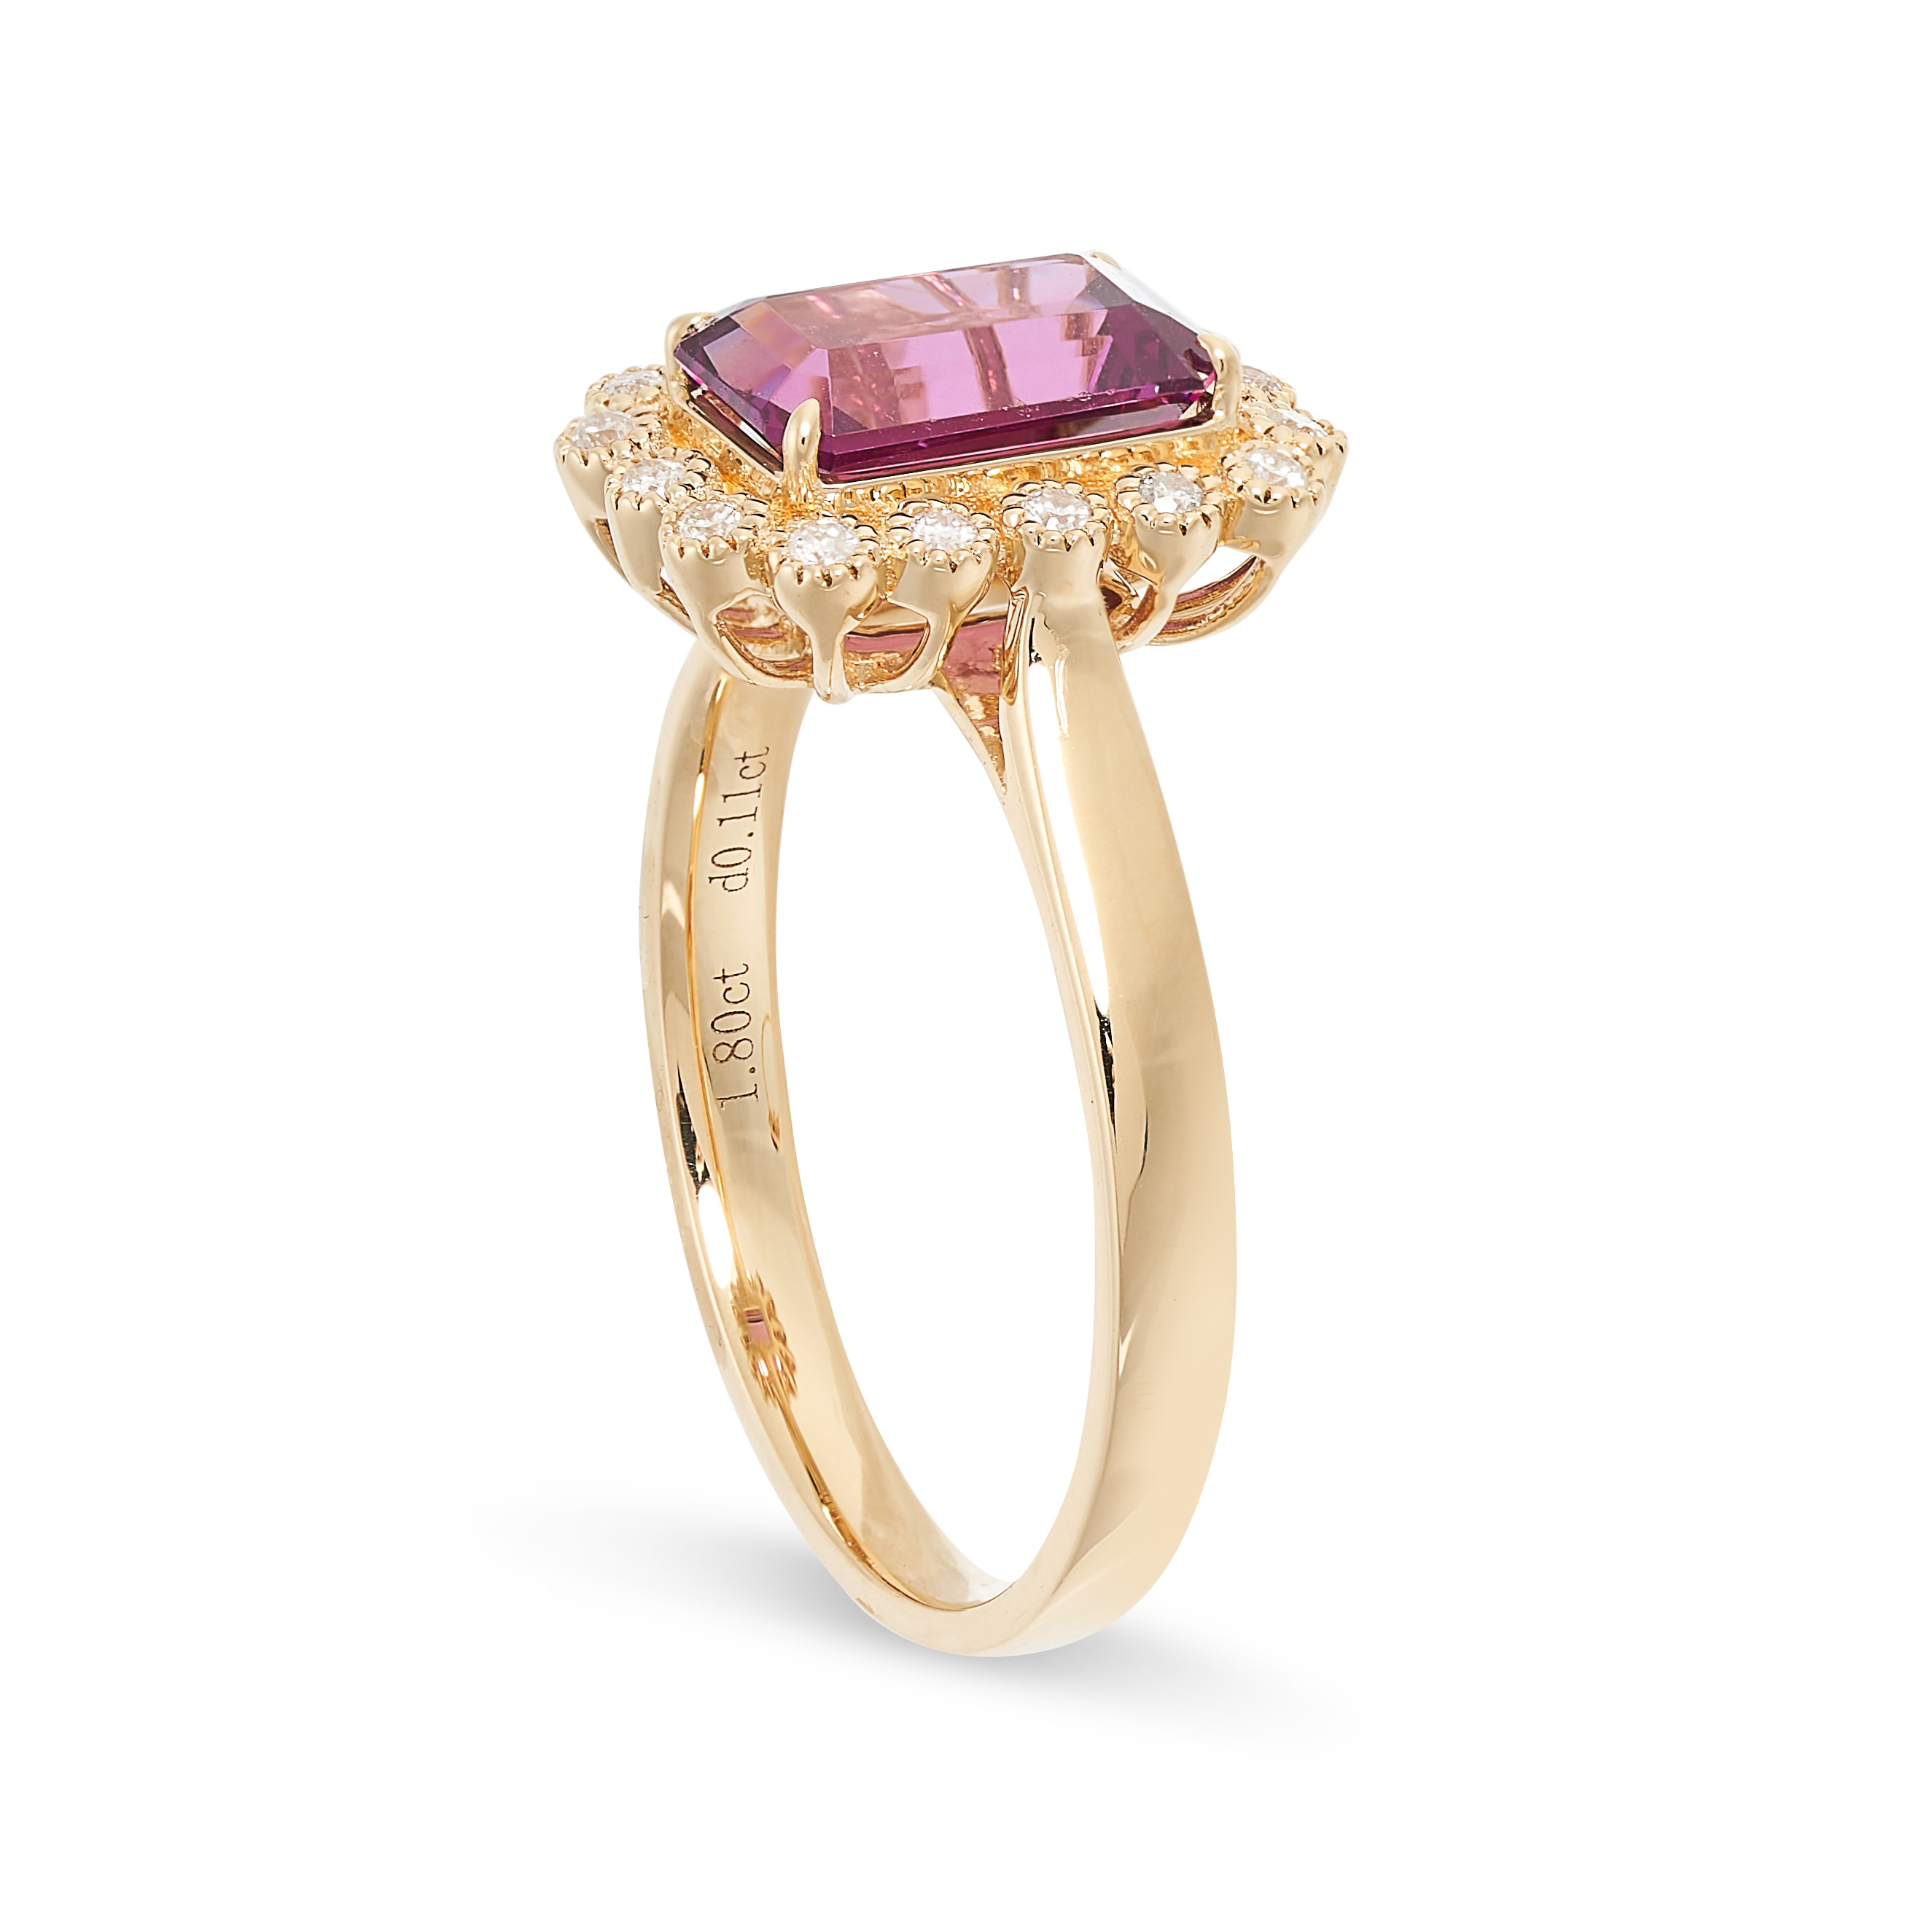 A GARNET AND DIAMOND RING in 18ct gold, set with an emerald cut garnet of 1.80 carats in a border of - Image 2 of 2